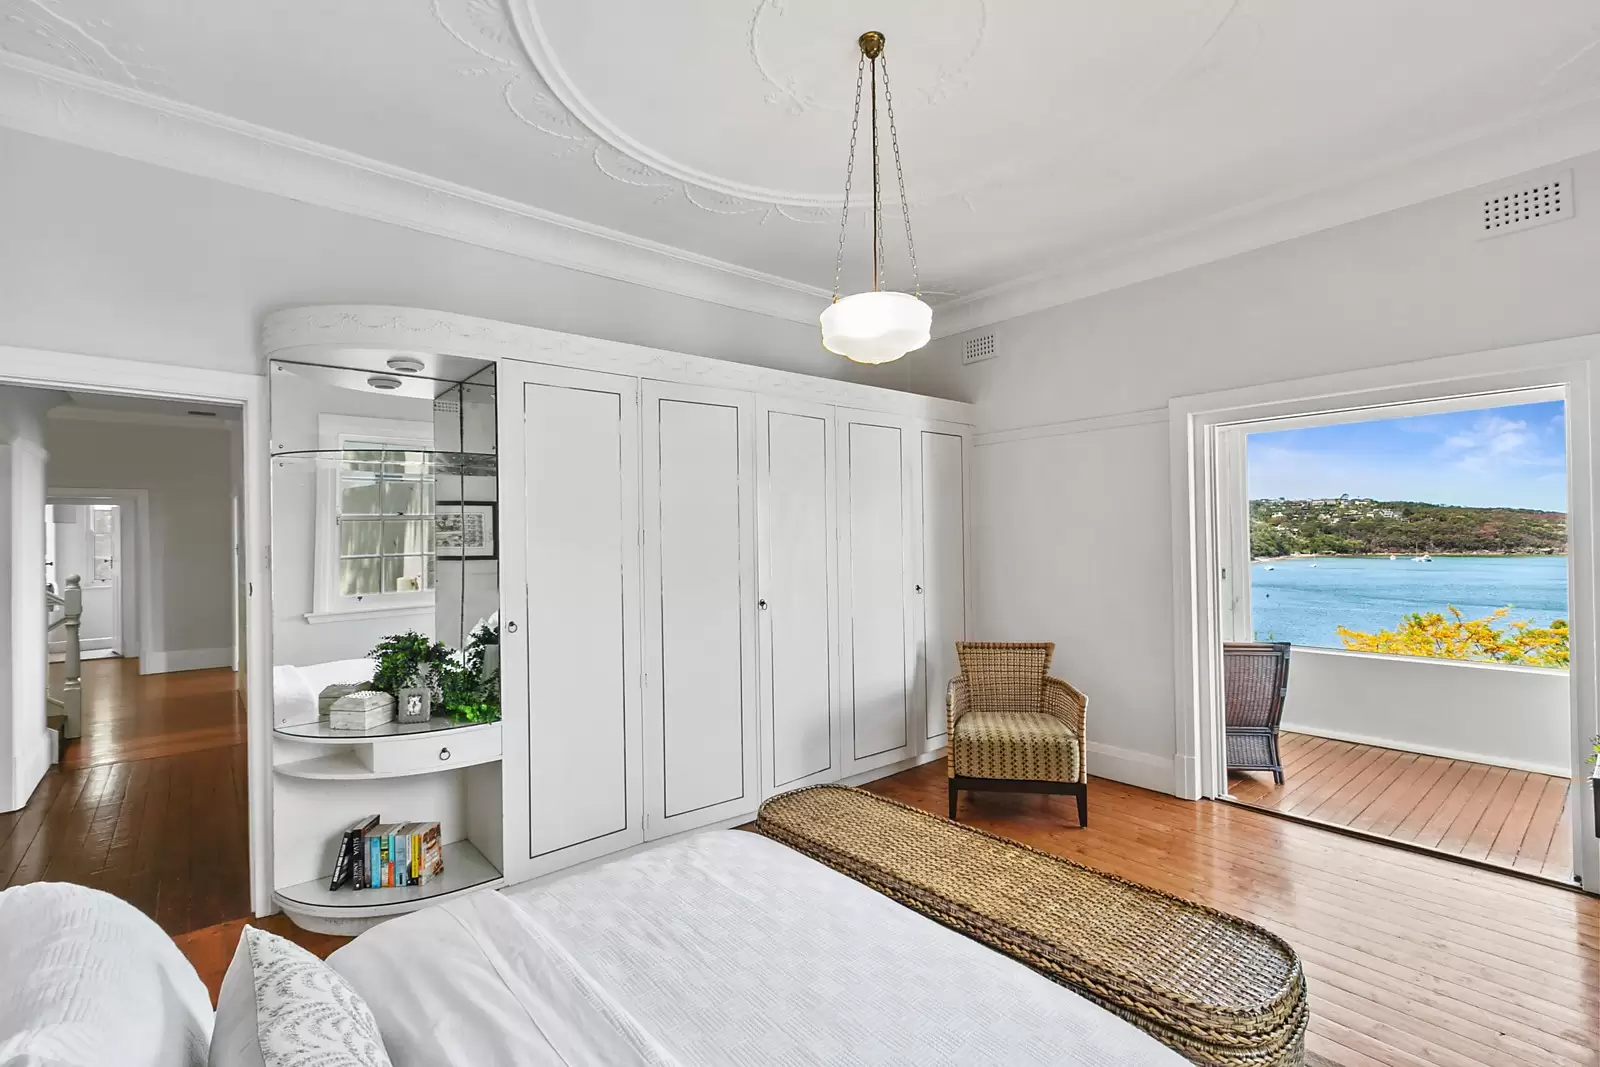 Photo #19: 51 Parriwi Road, Mosman - Sold by Sydney Sotheby's International Realty